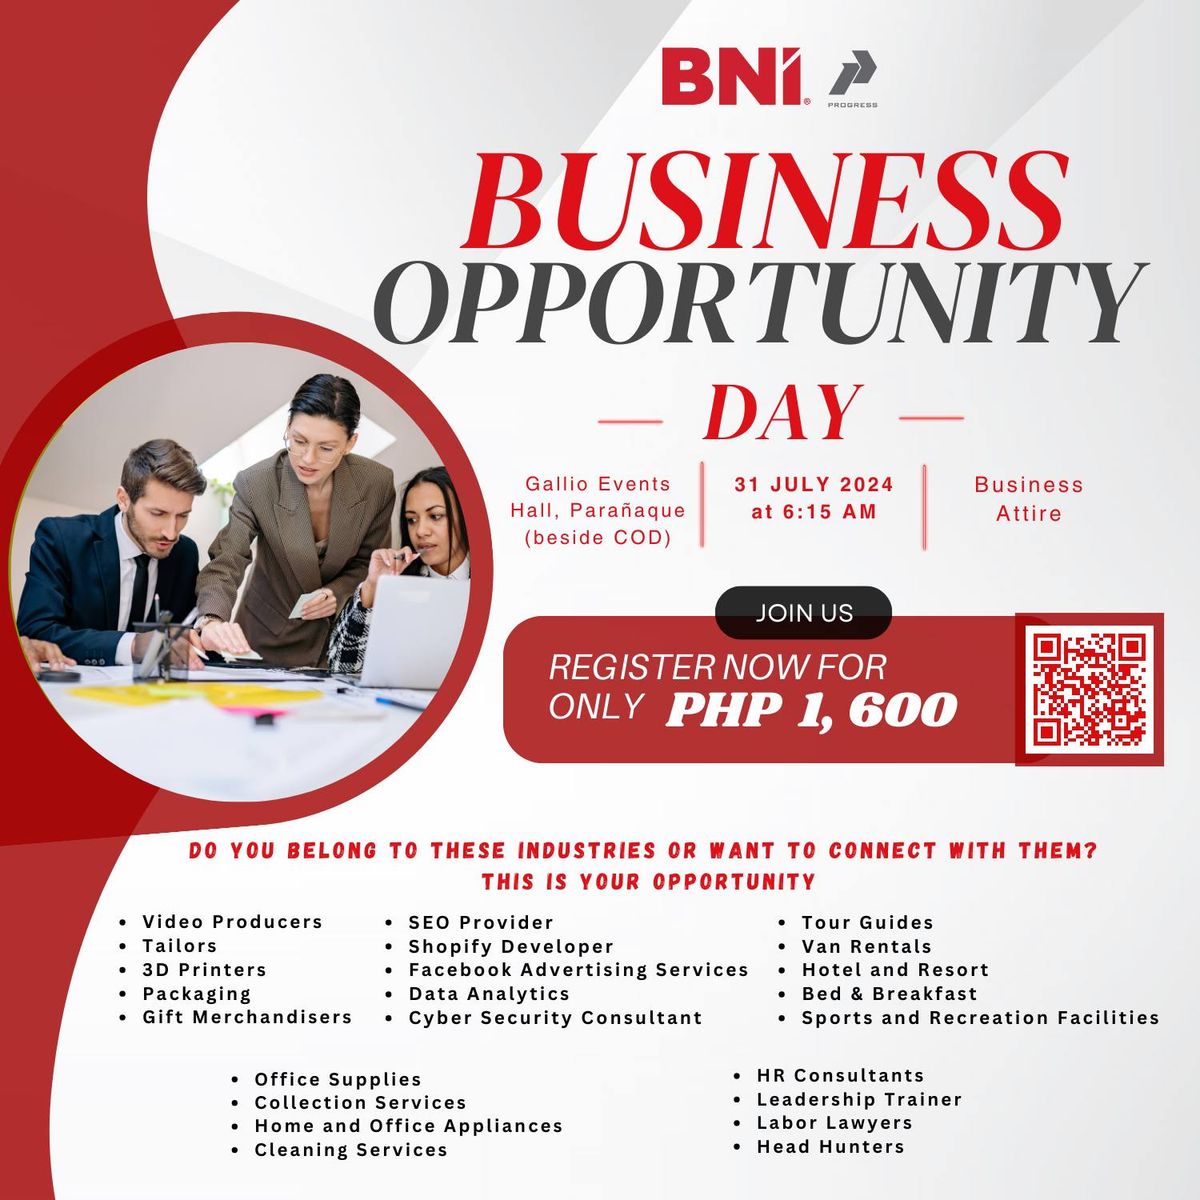 BNI Business Opportunity Day